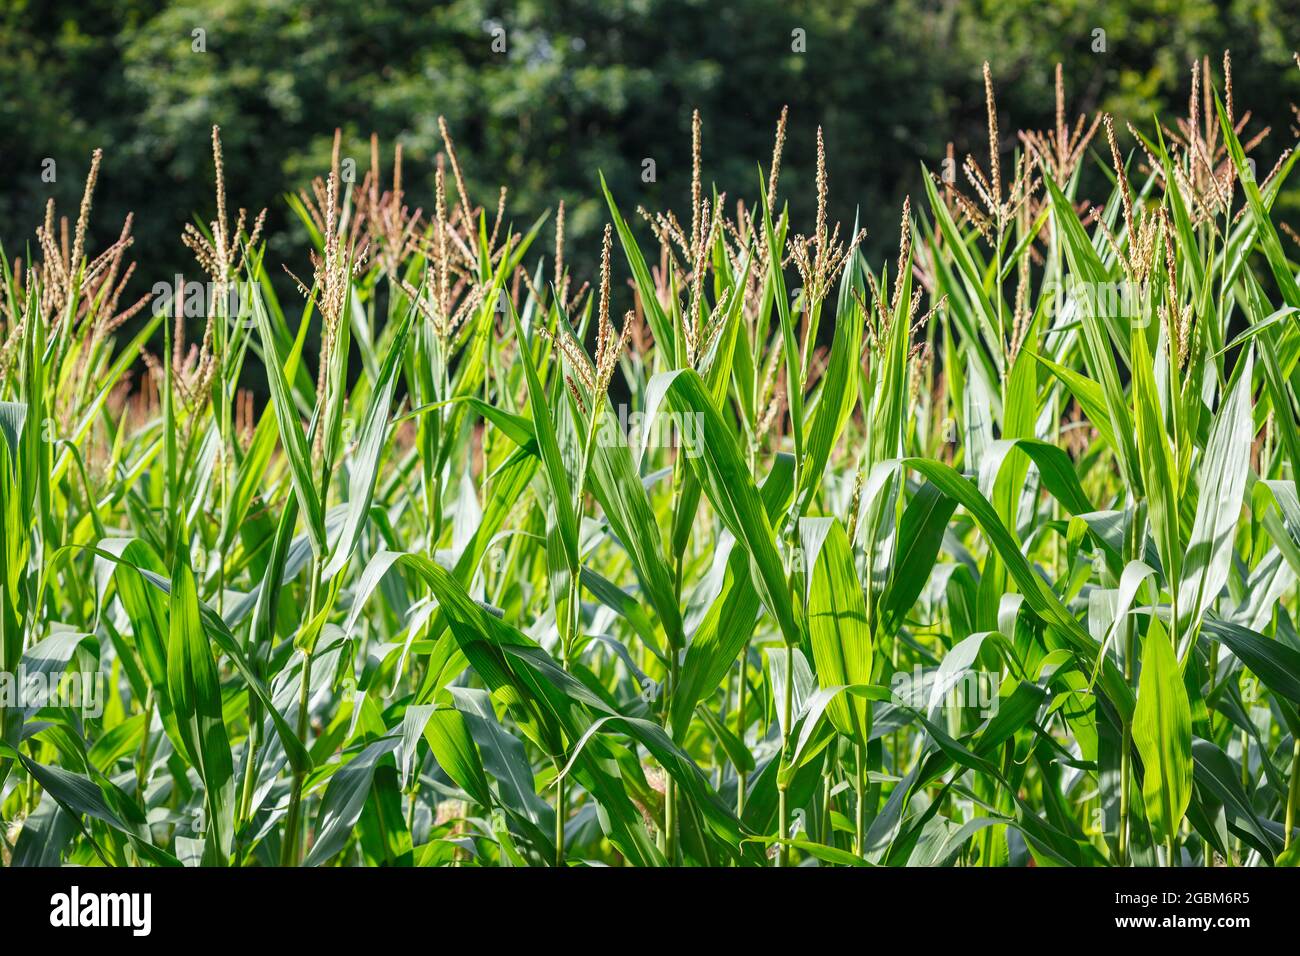 Lush green corn plants (maize) with tassels and leaves in small organic landscape farm field in Switzerland Stock Photo